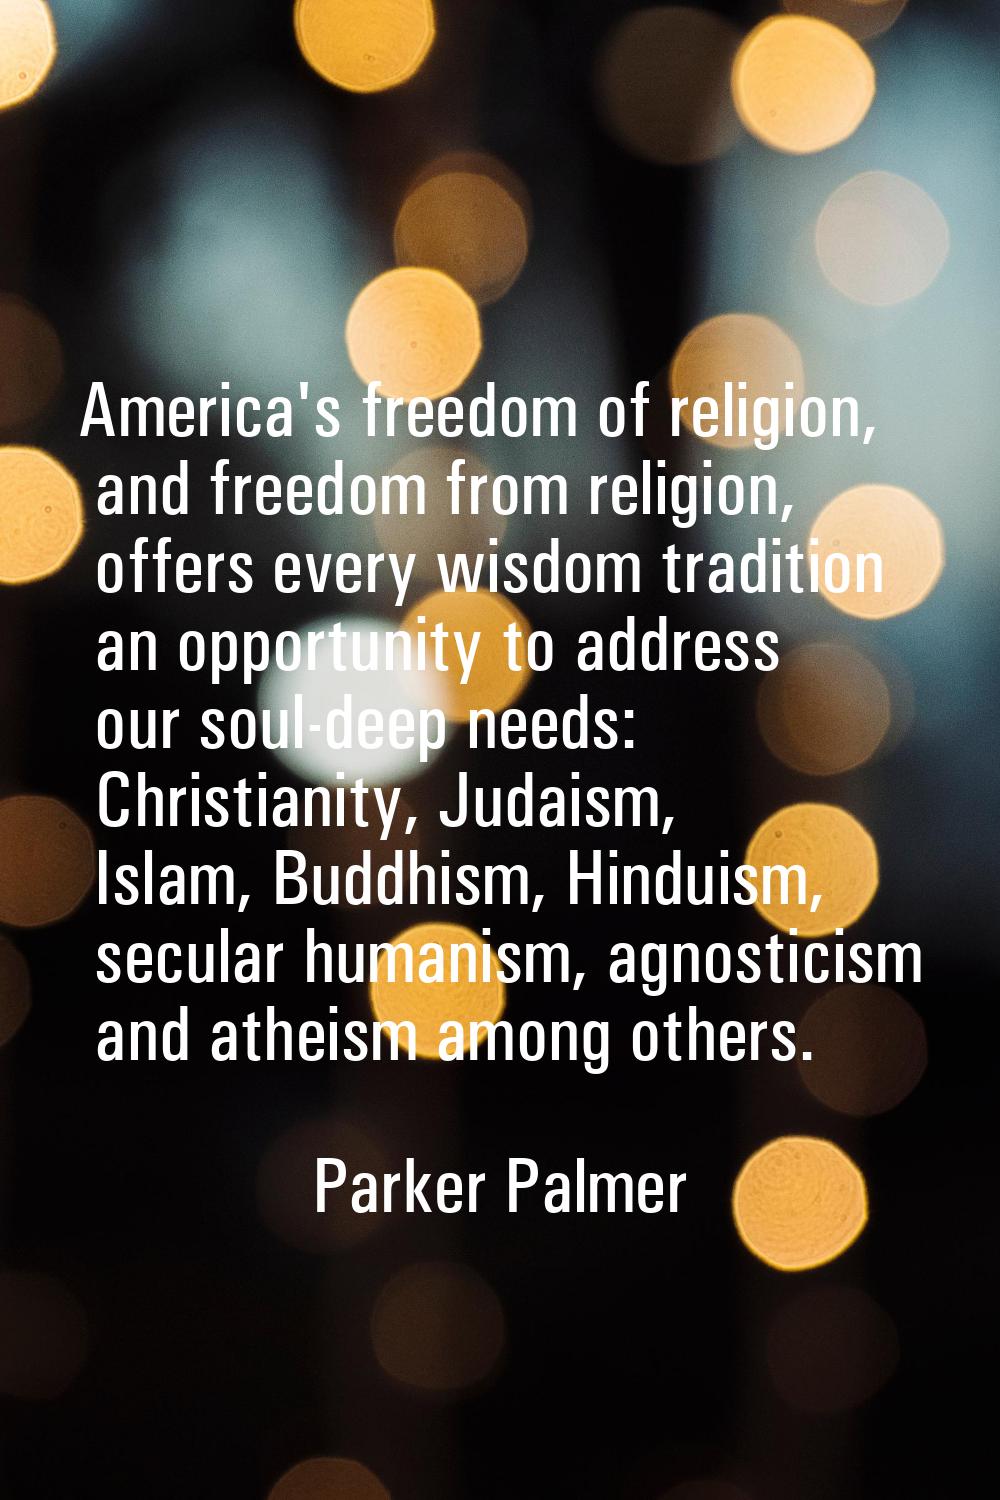 America's freedom of religion, and freedom from religion, offers every wisdom tradition an opportun